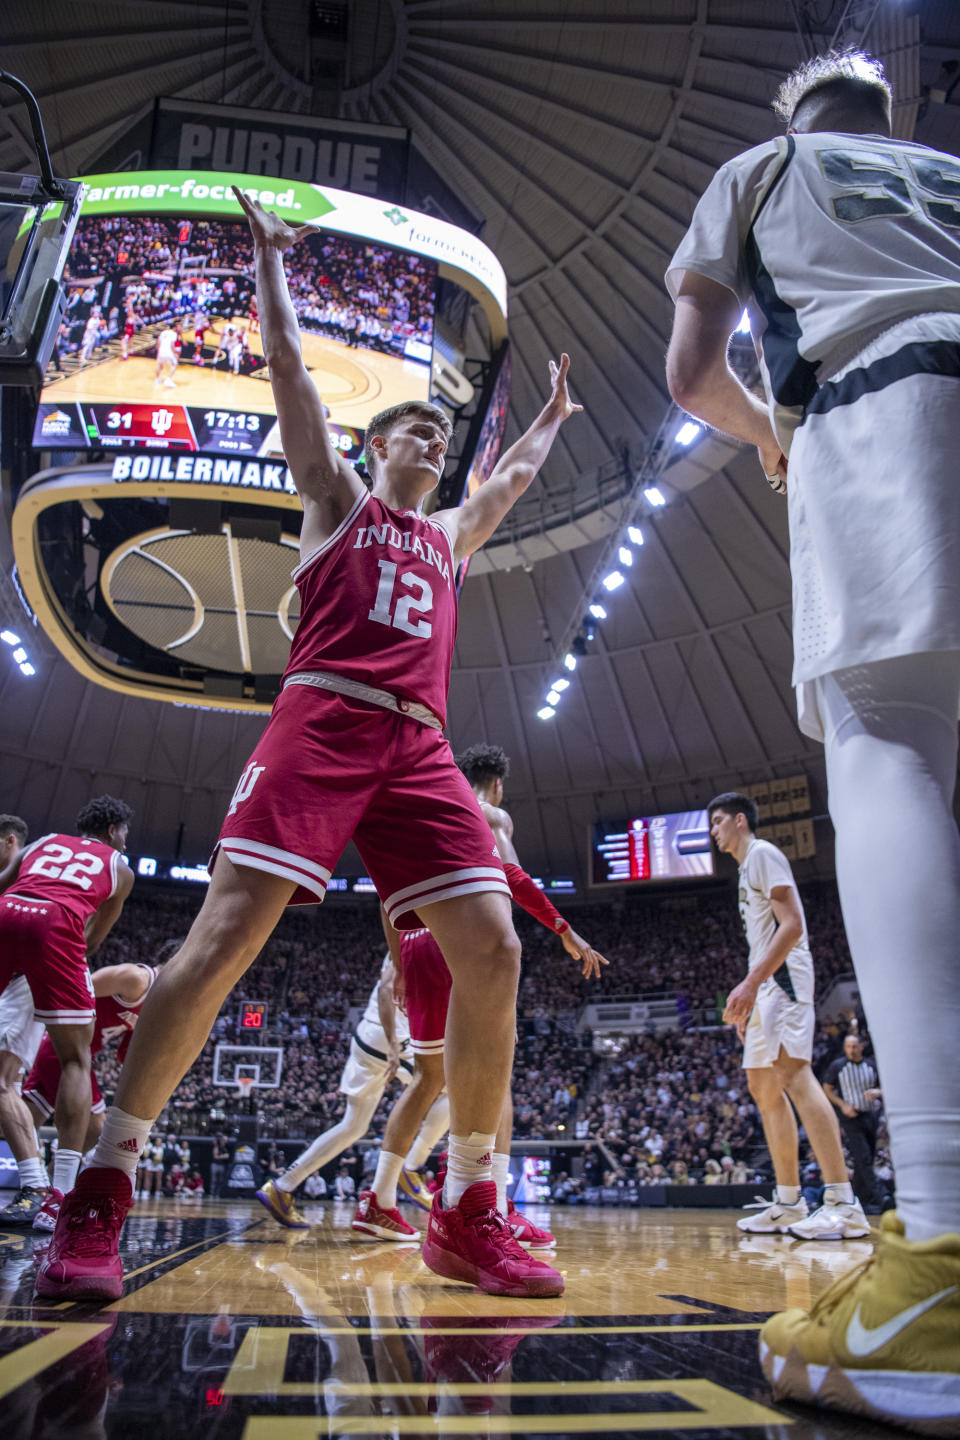 Indiana forward Miller Kopp (12) defends Purdue guard Sasha Stefanovic (55) as Stefanovic works to in-bound the ball during the second half of an NCAA college basketball game, Saturday, March 5, 2022, in West Lafayette, Ind. (AP Photo/Doug McSchooler)